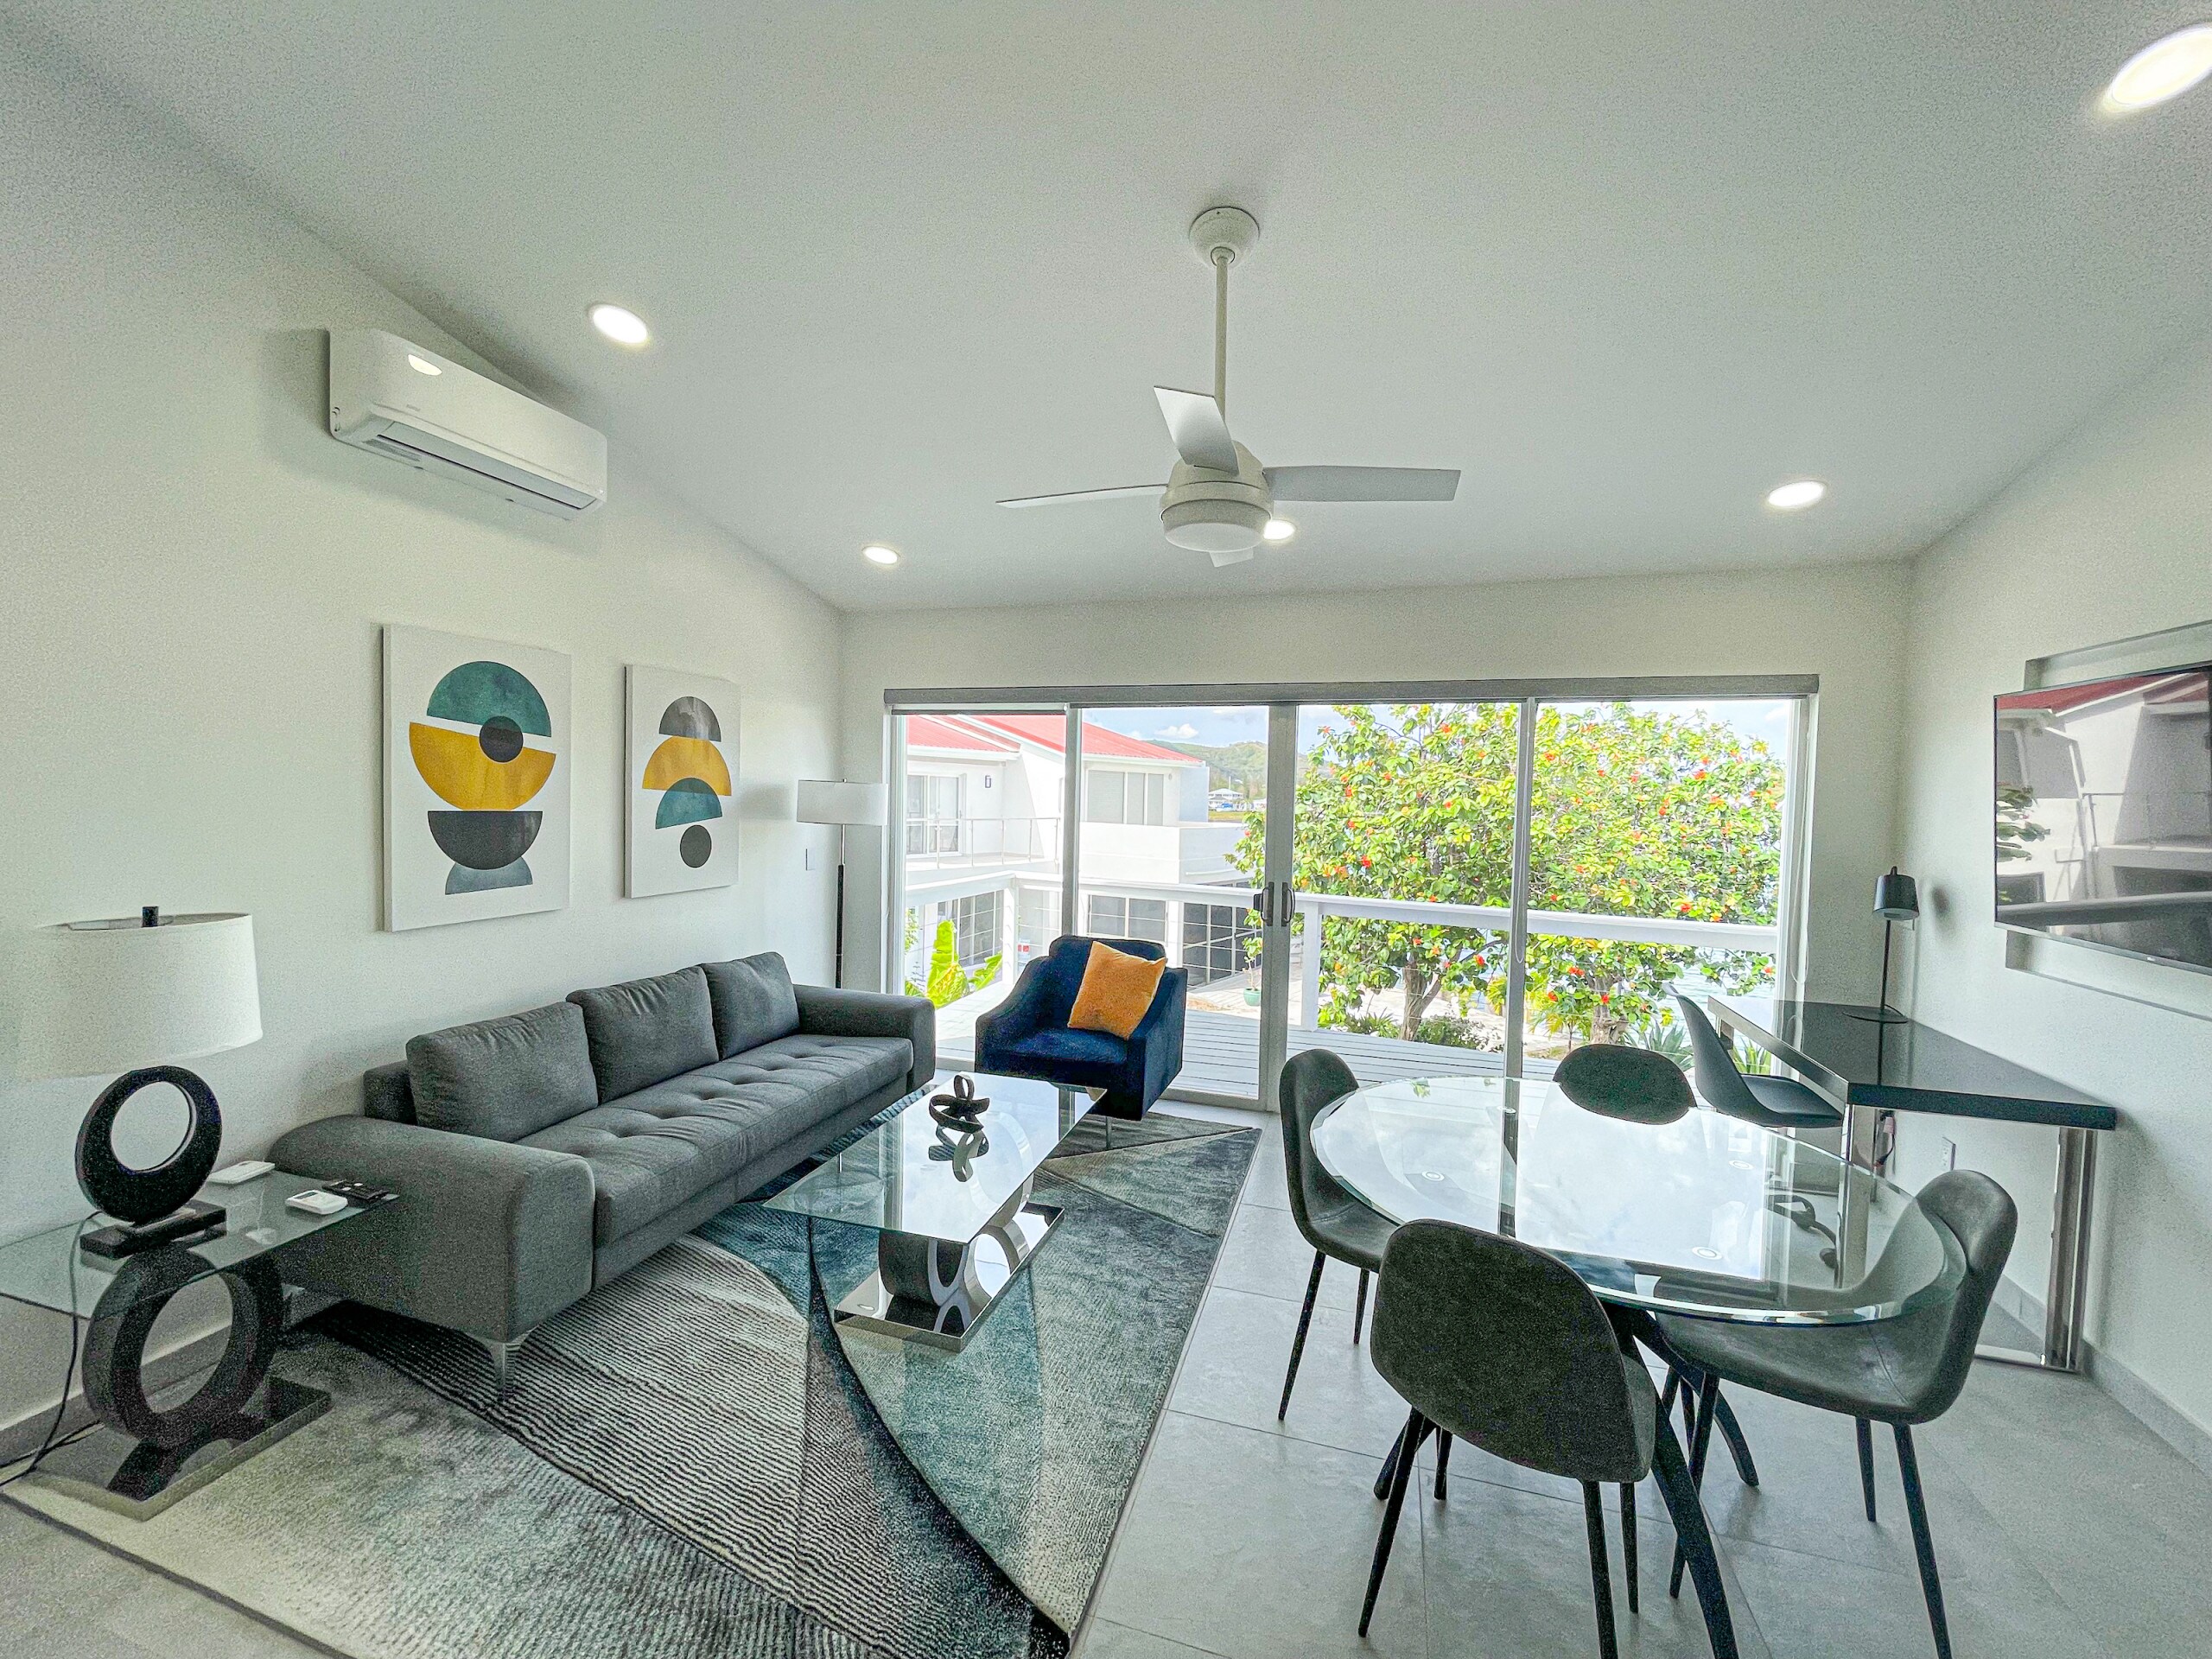 Stylish and Spacious one-Bedroom Apartment on the waterfront with an open plan interior, a round glass dining table, comfy grey sofa, a wall-mounted flat-screen TV, workspace area, tall glass walls, sliding doors, and a private balcony at Jolly Harbour Villa Rentals